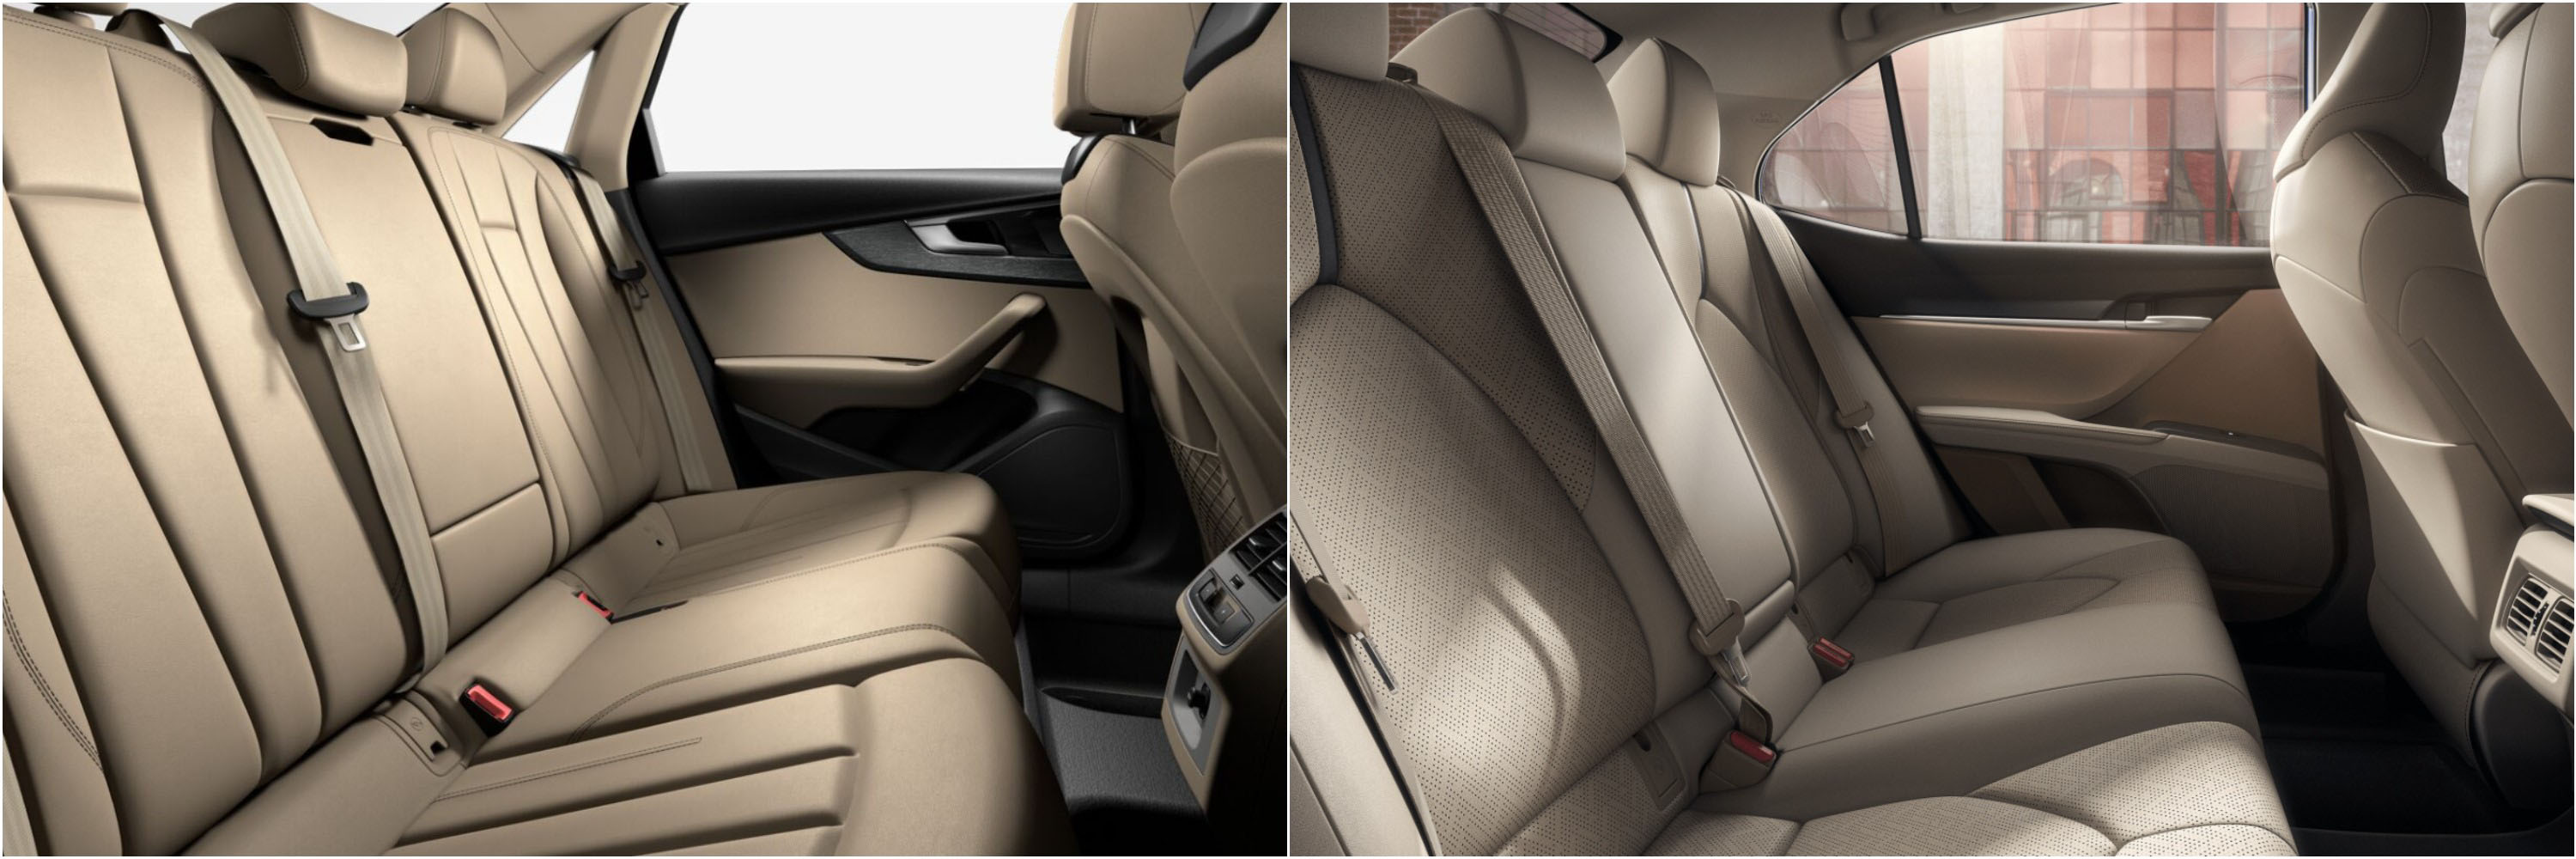 2021 Audi A4 Vs Toyota Camry Interior Seating